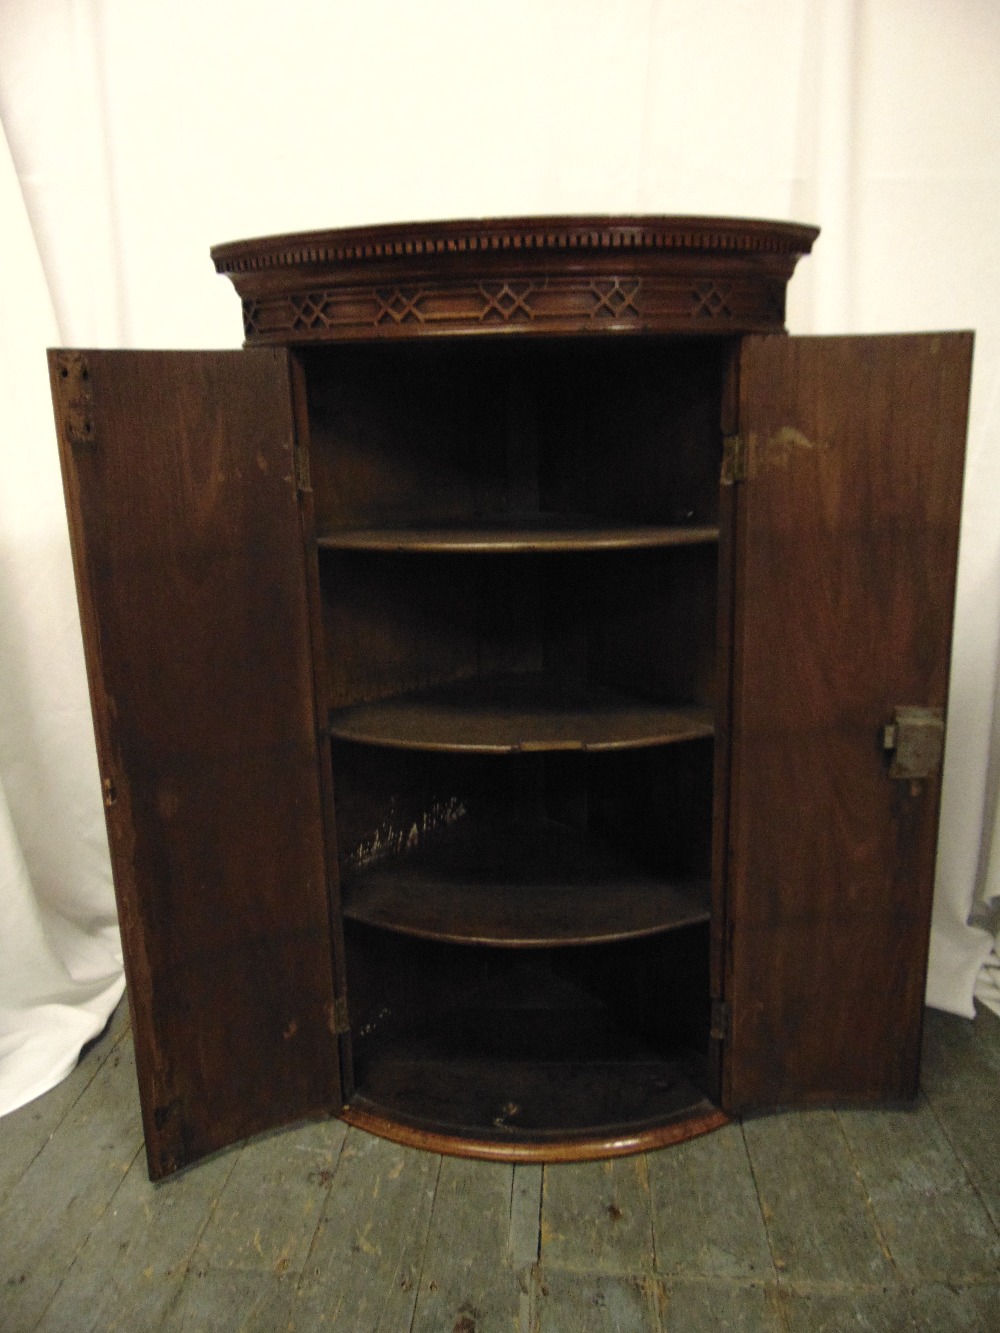 A 19th century mahogany inlaid wall mounted corner cabinet with hinged doors - Image 2 of 2